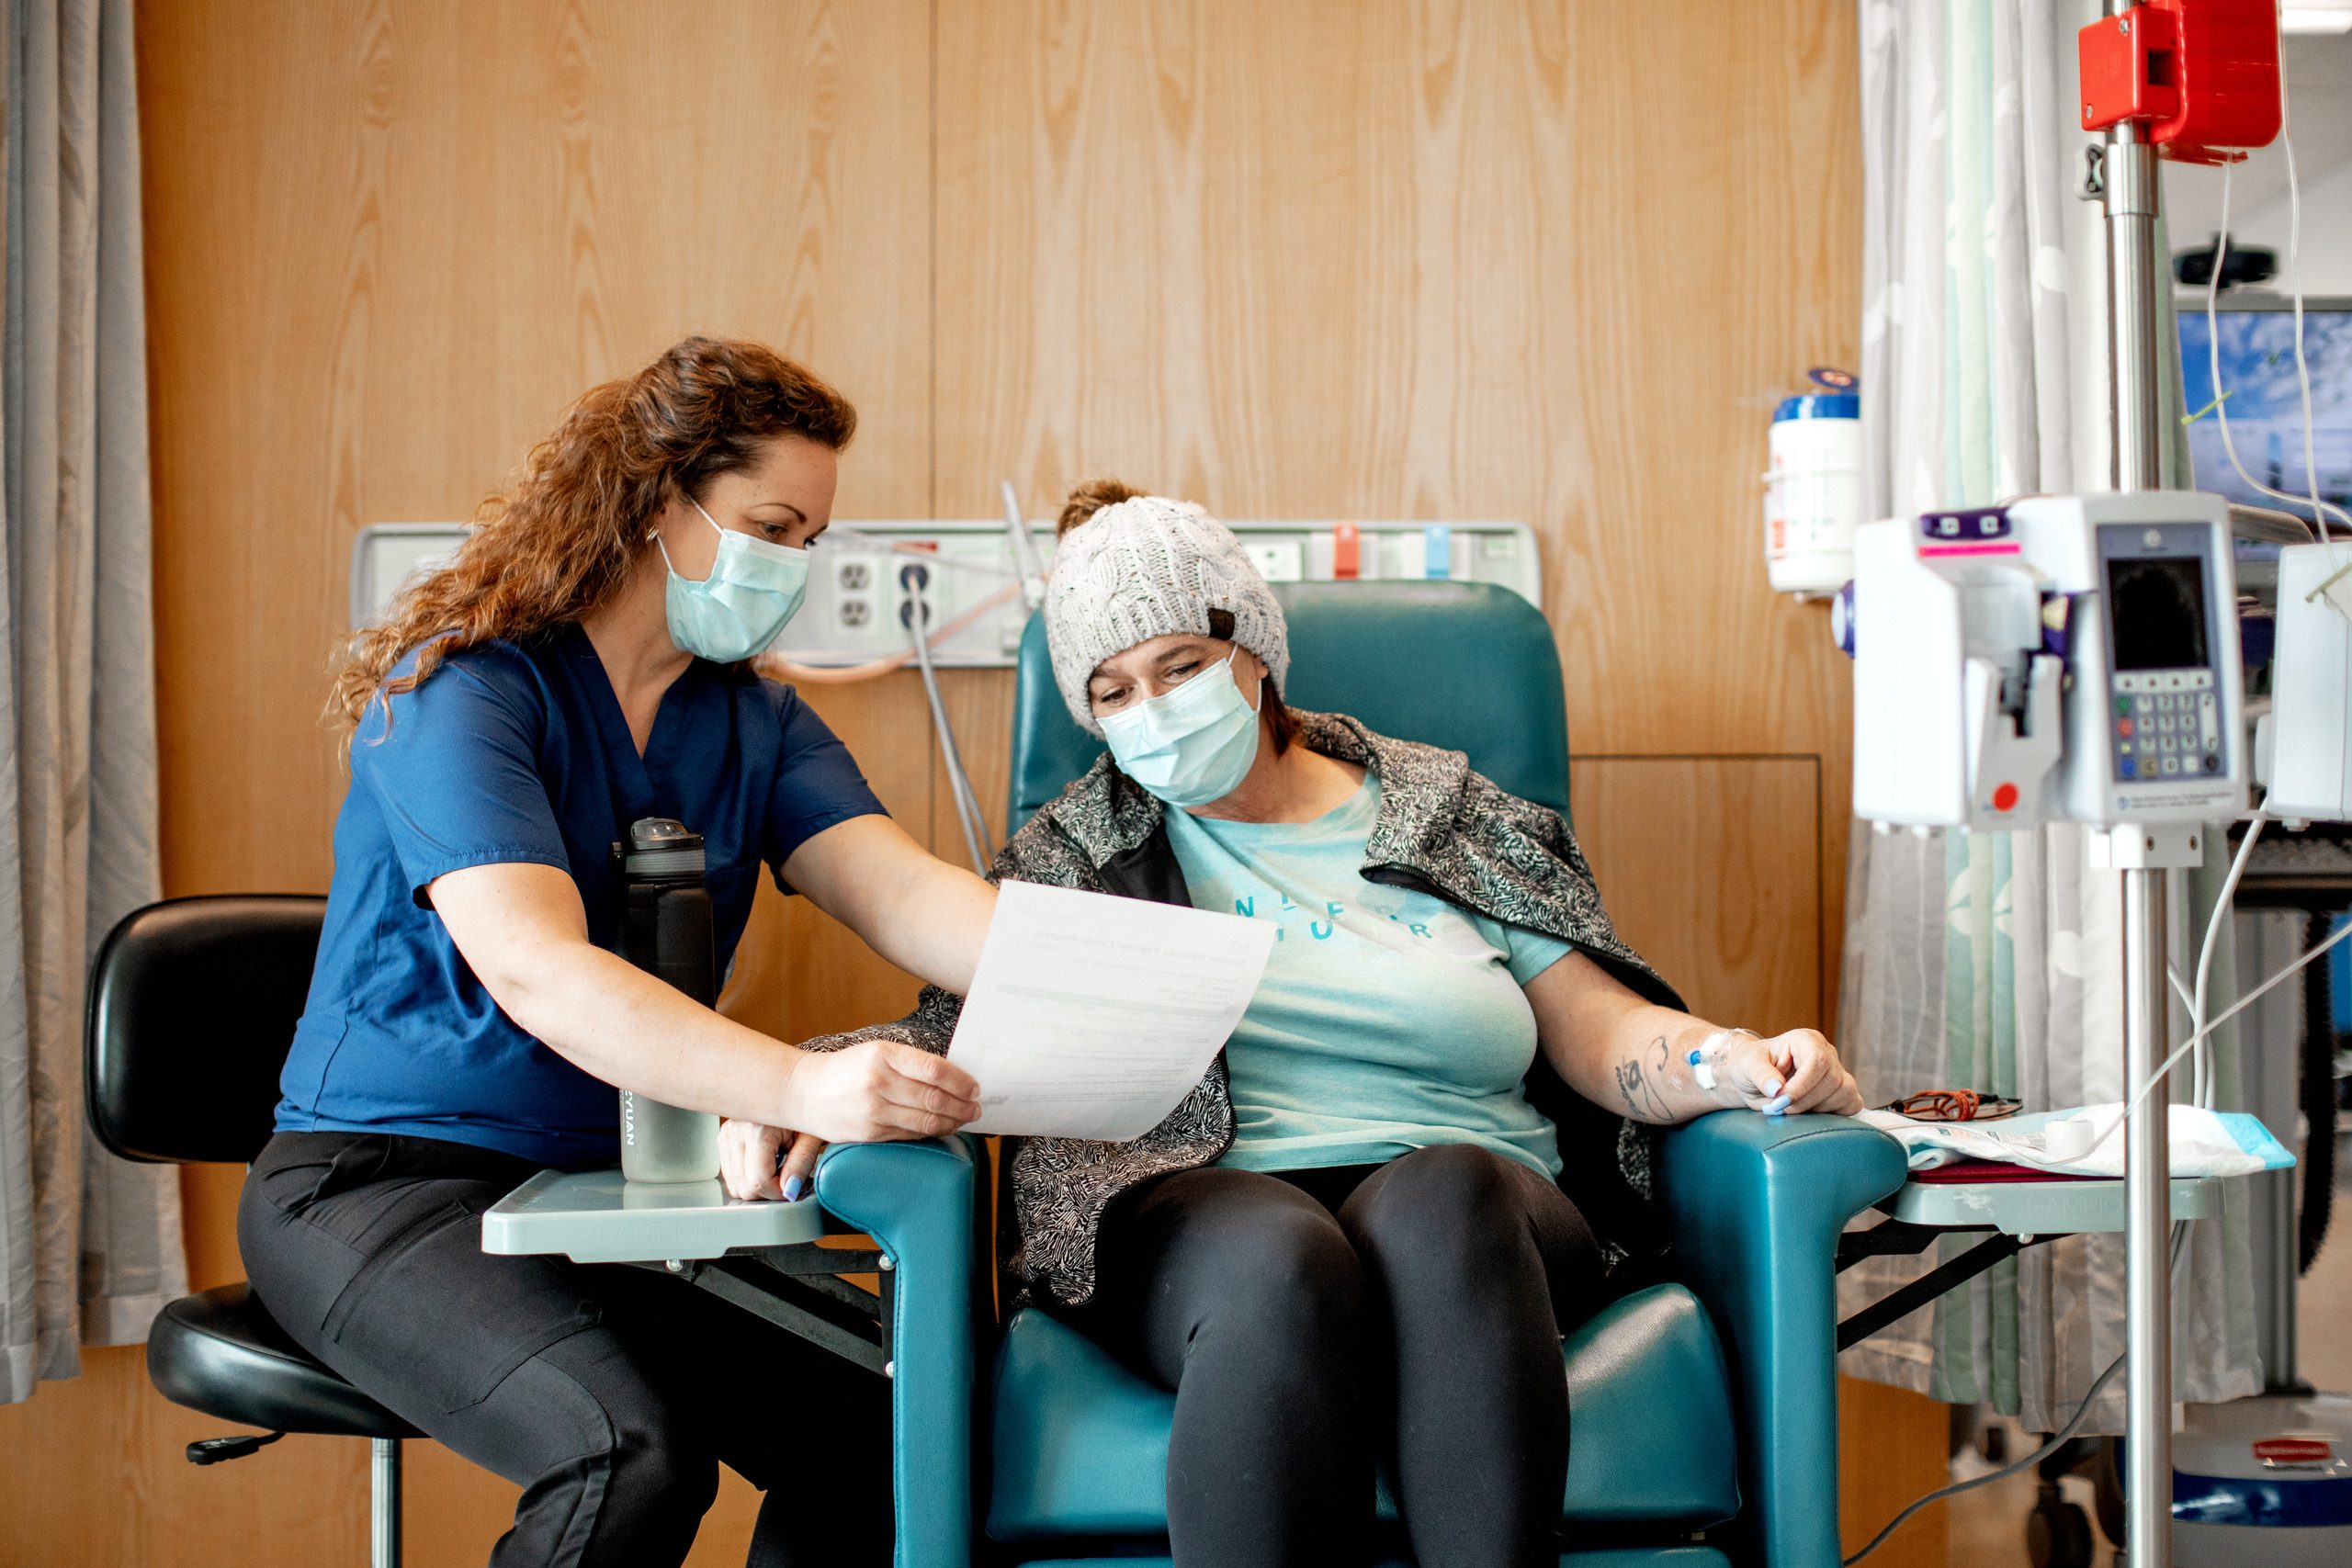 A health care worker with curly brown hair wears a face mask and holds out a sheet of paper to a patient in a chair. The patient wears a knitted hat and has a jacket draped over their shoulders. The patient also wears a medical face mask while sitting next to an IV.